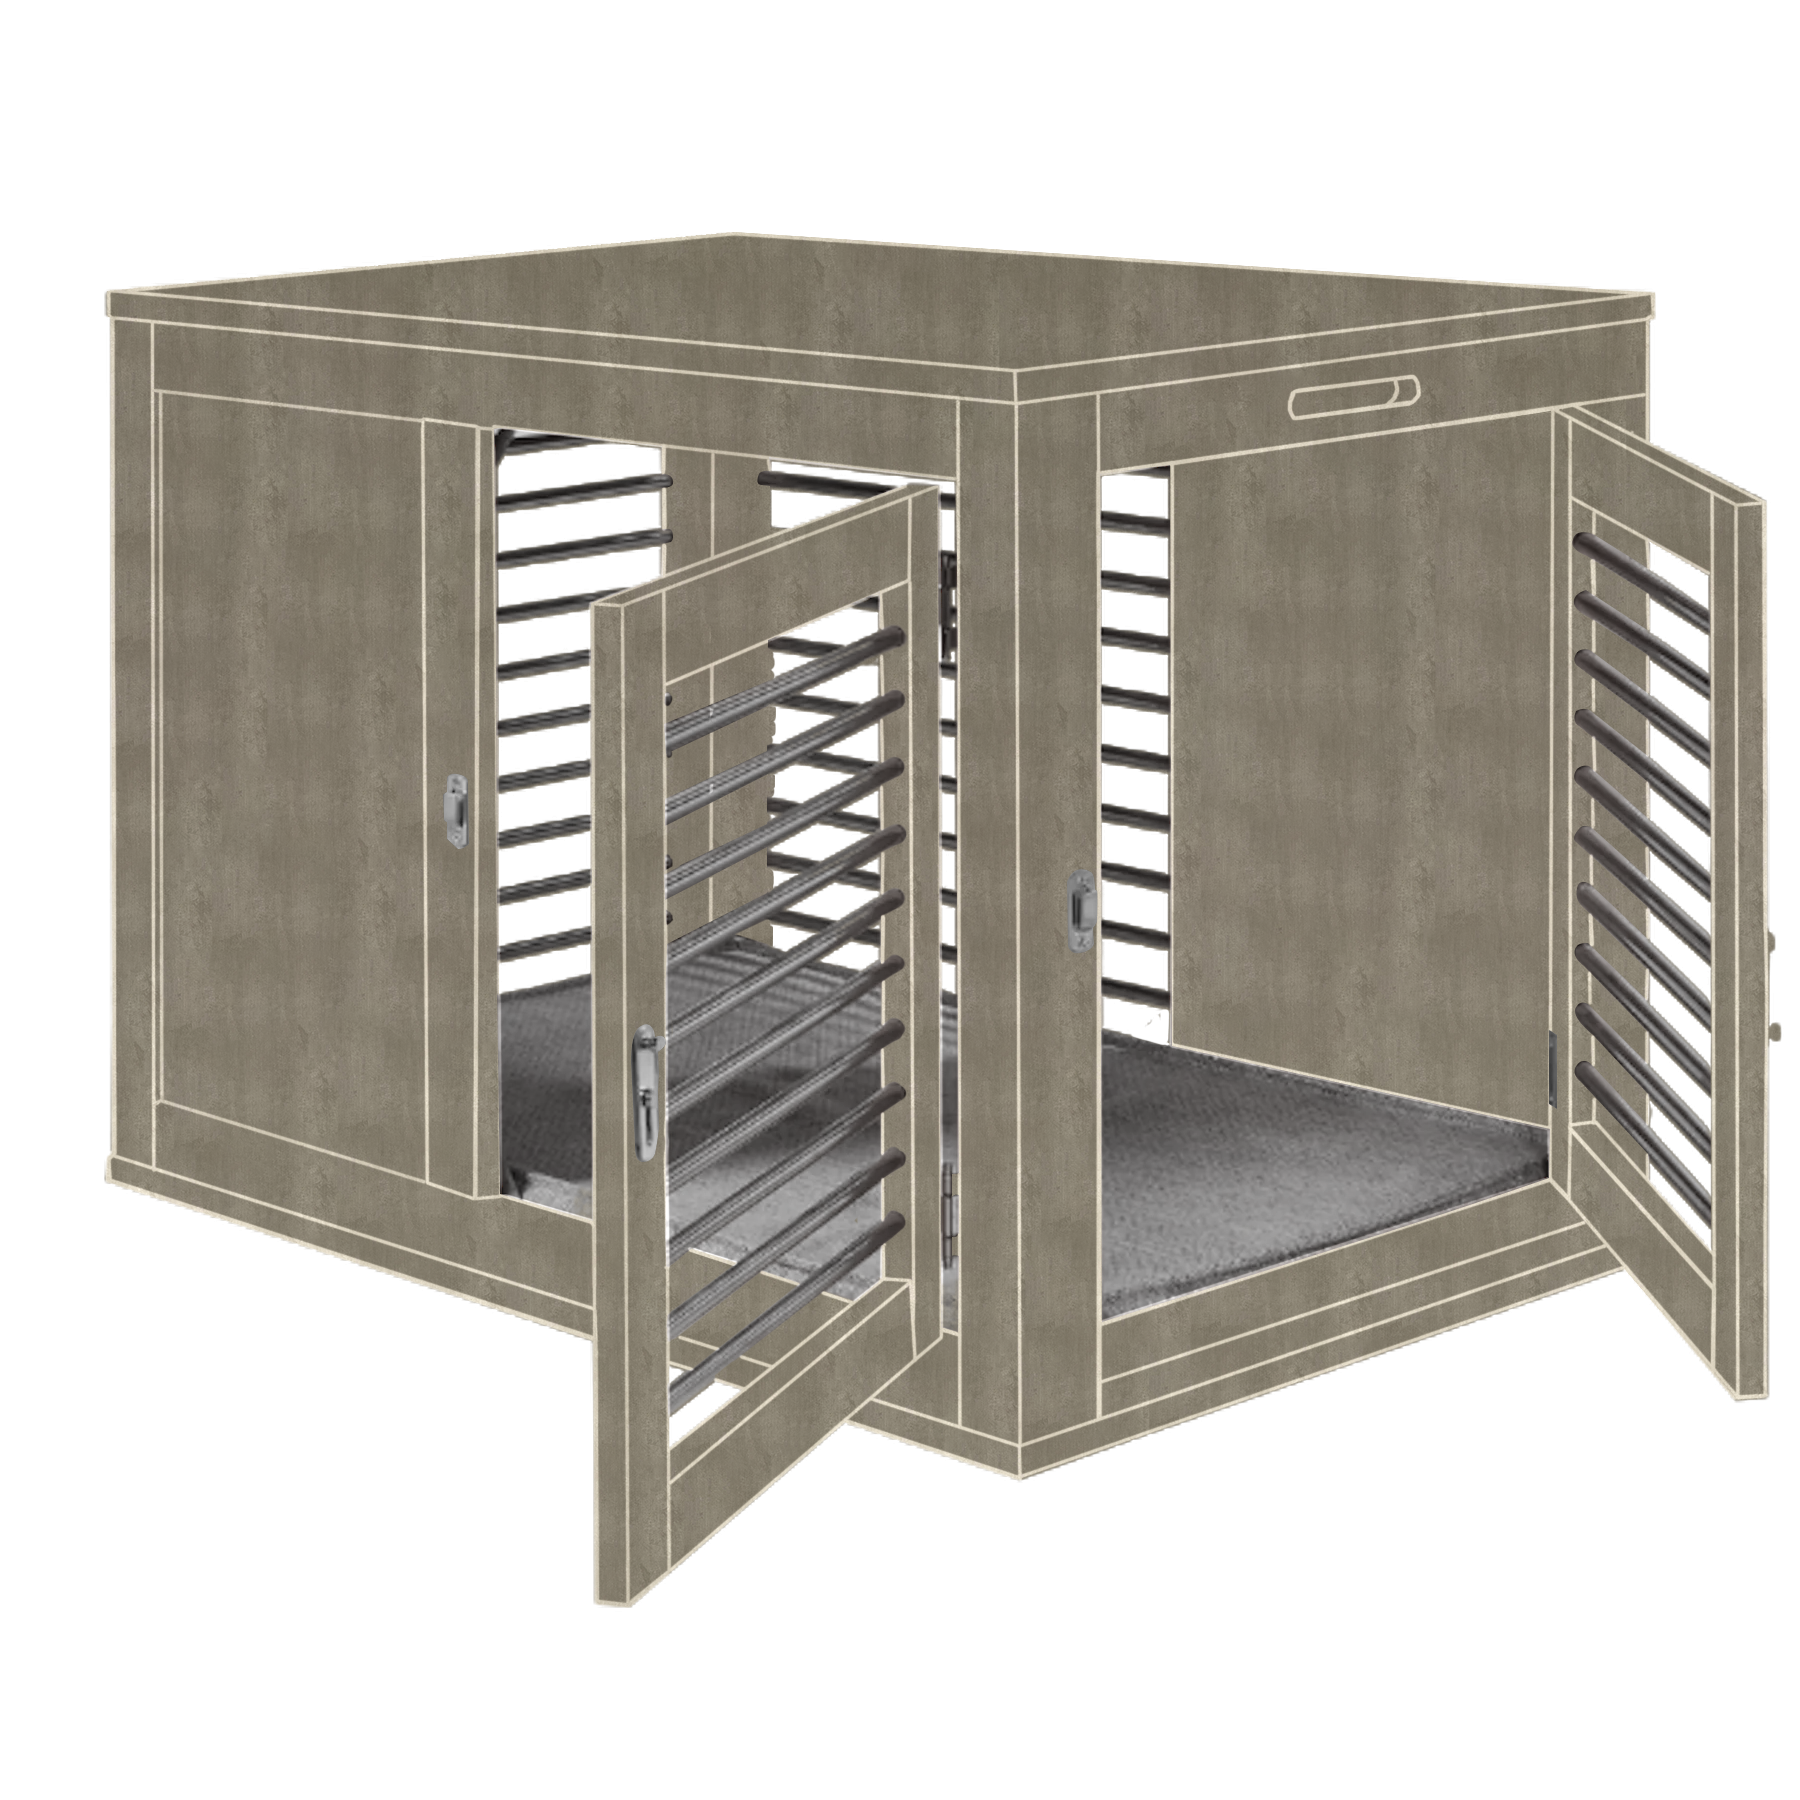 urban-vibe-abstract-gray-green-moderno-crate-dog-kennel